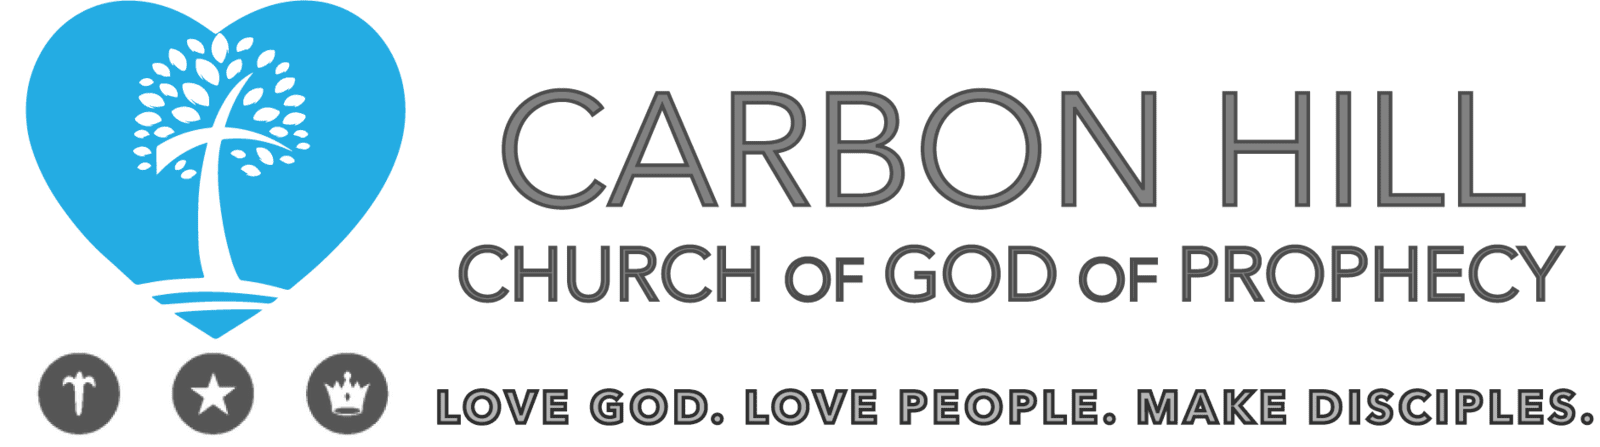 Carbon Hill Church of God of Prophecy